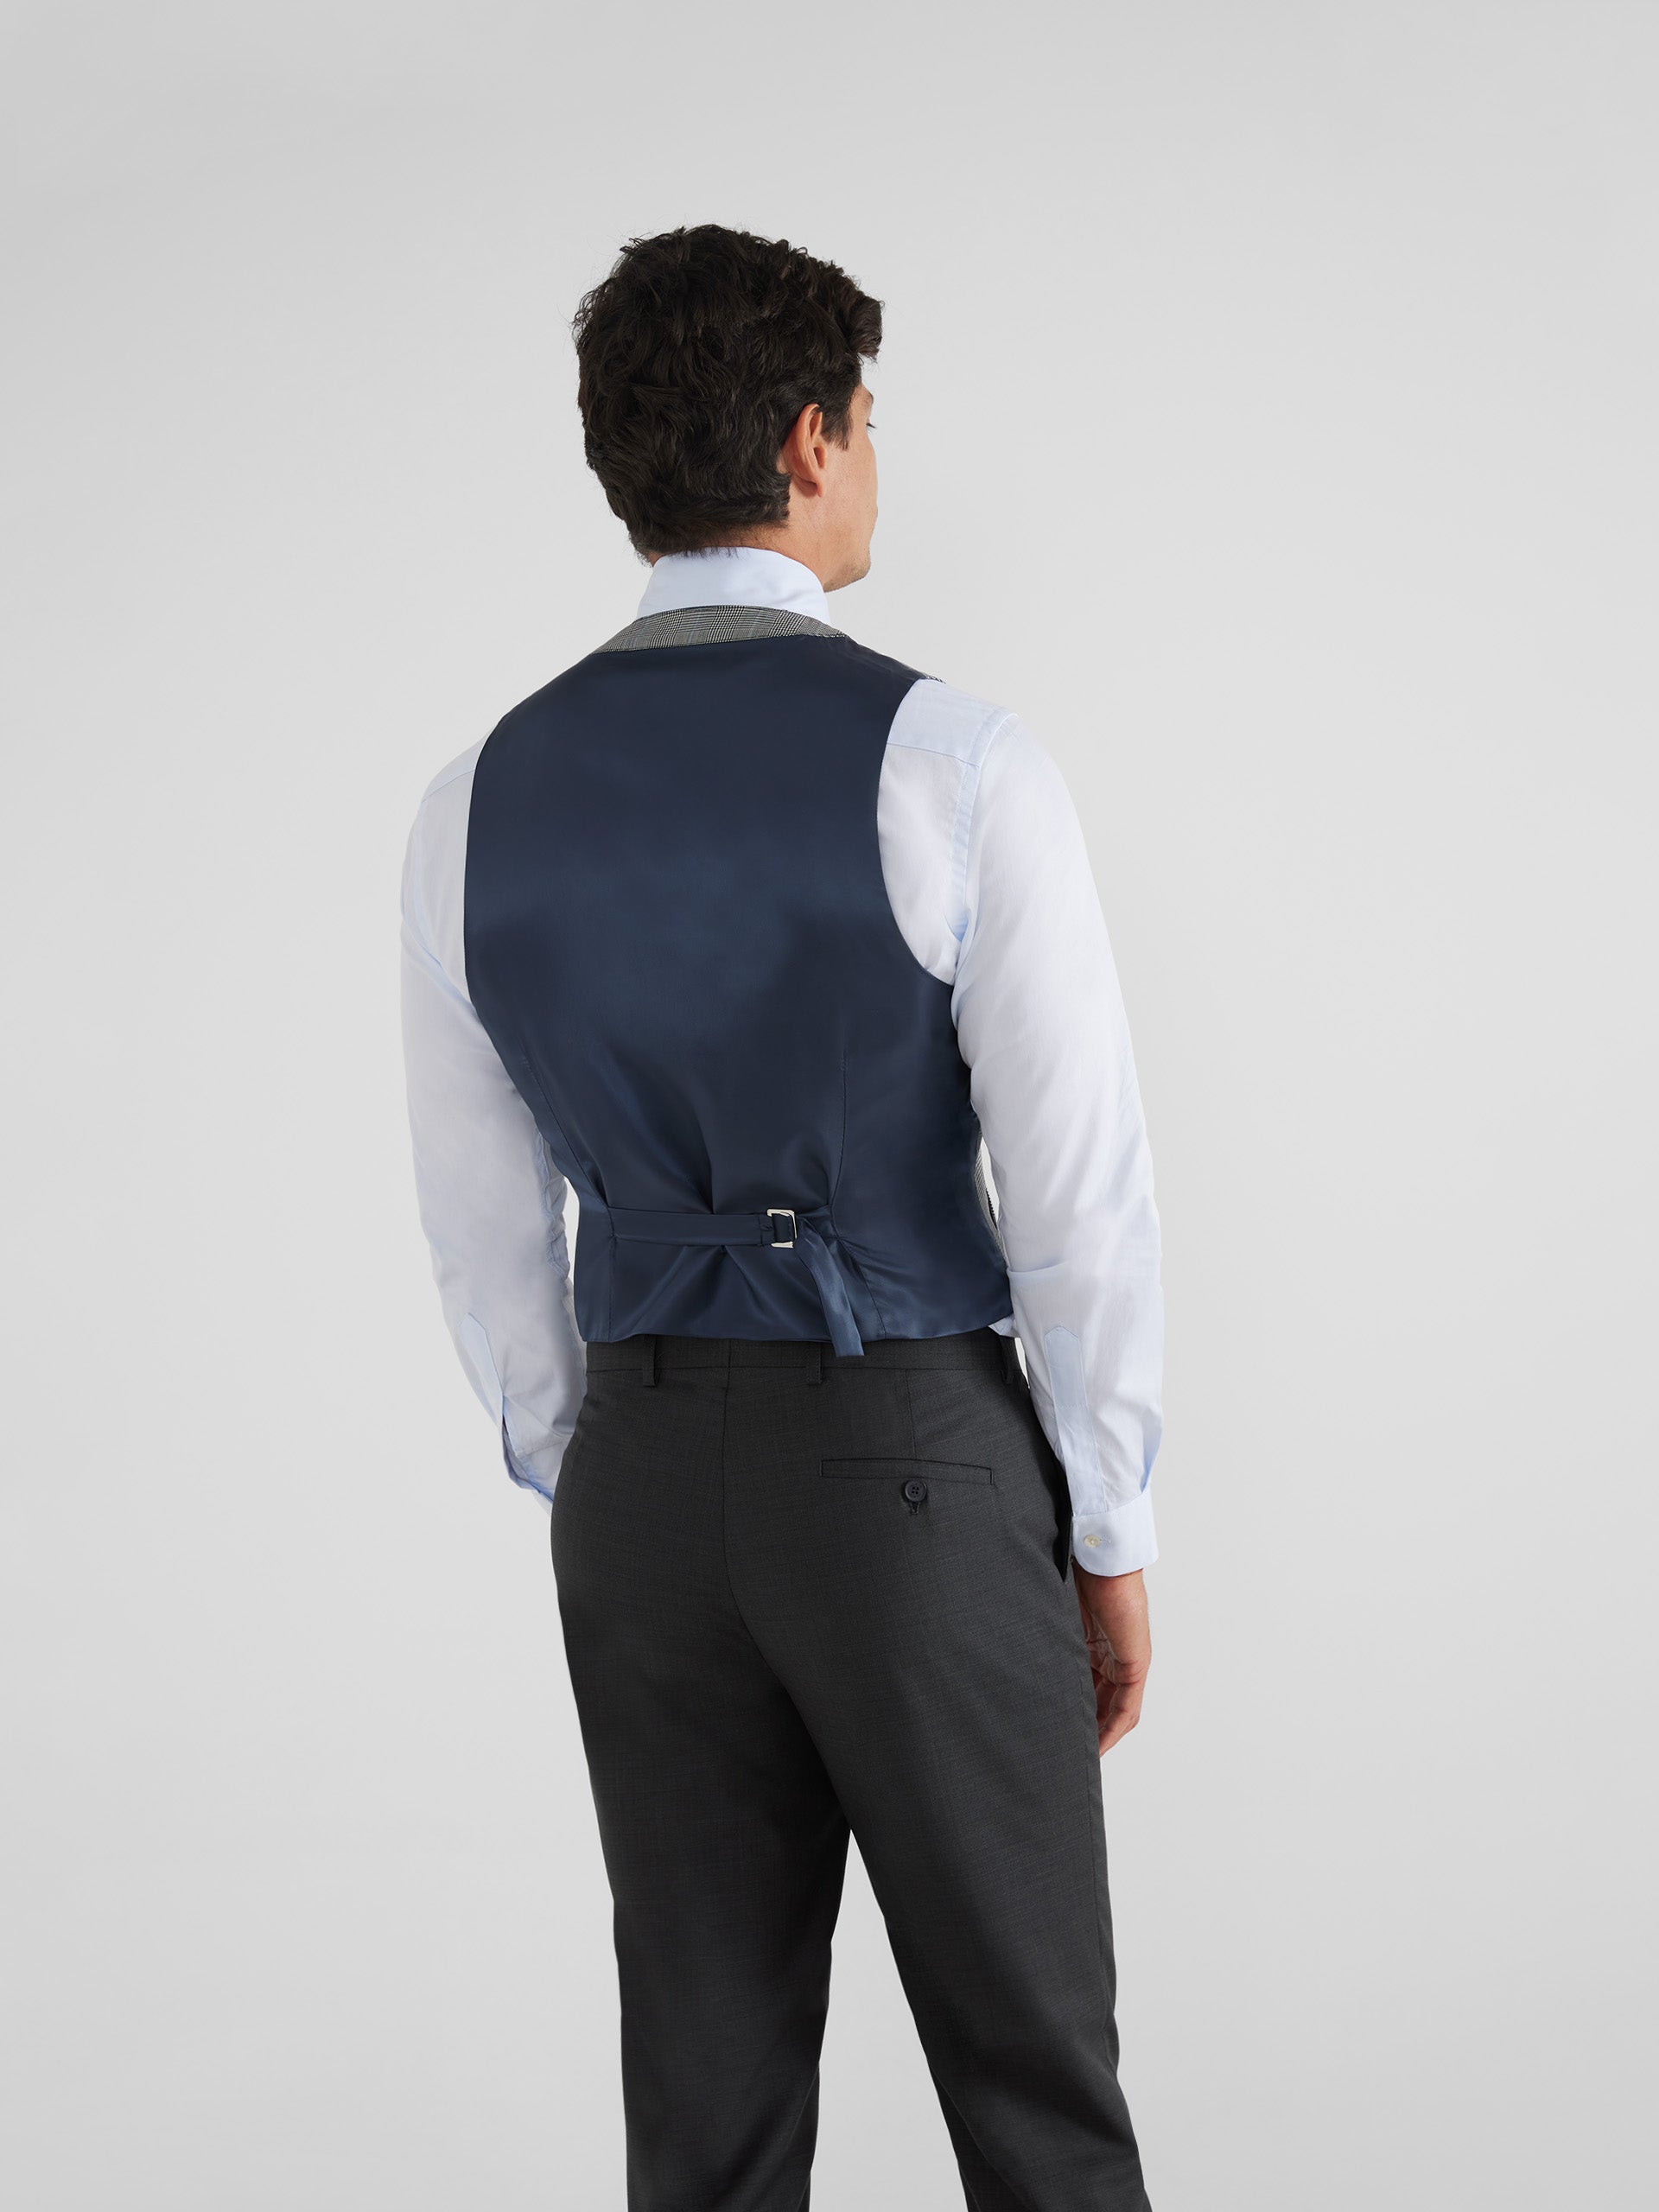 Gray prince of wales tailoring jacket vest